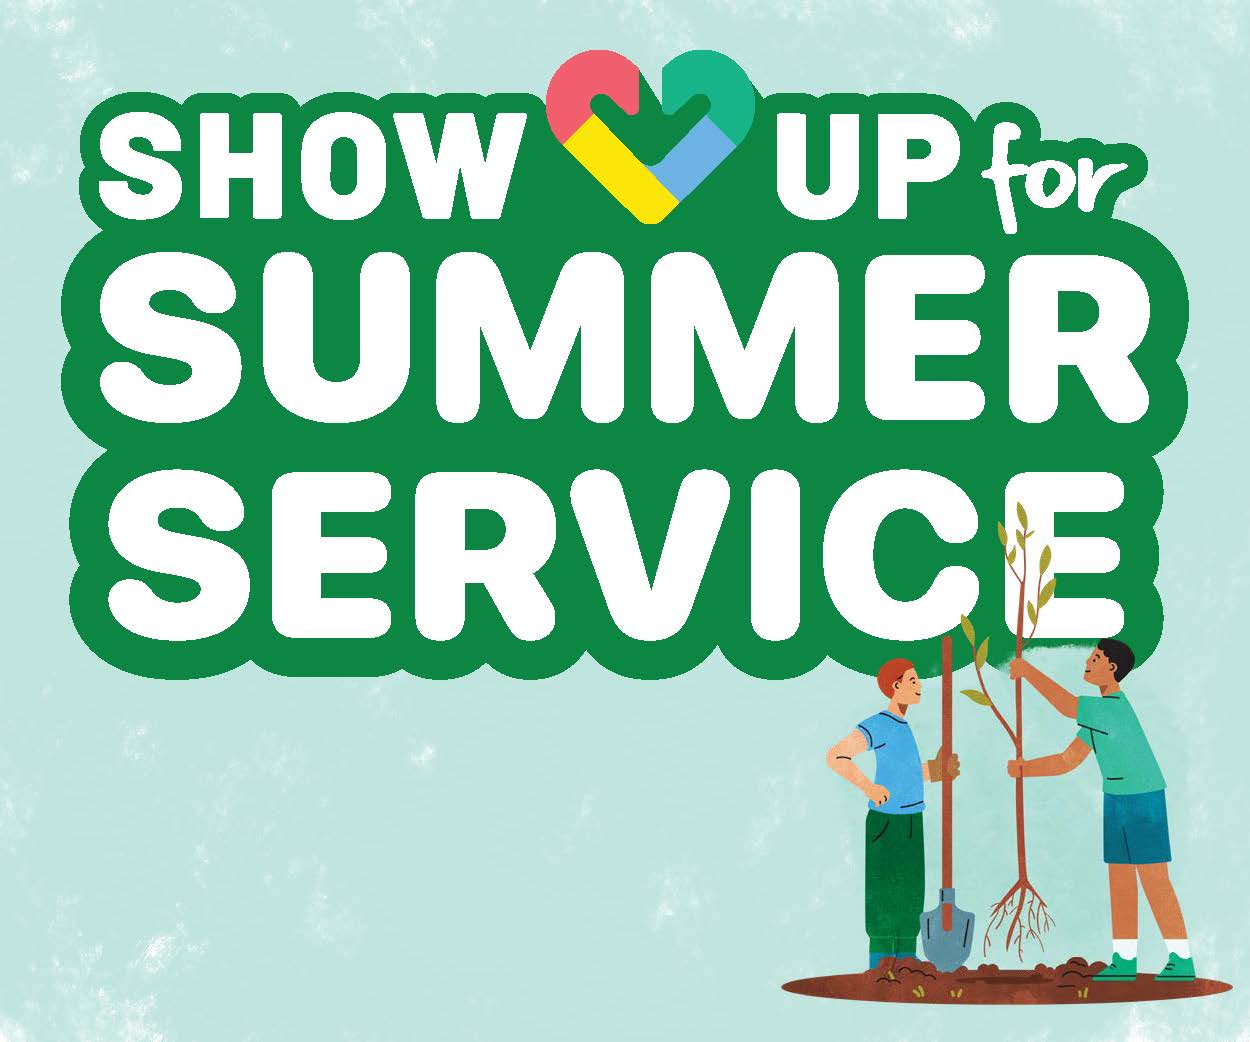 Show Up for Summer Service Fair photo